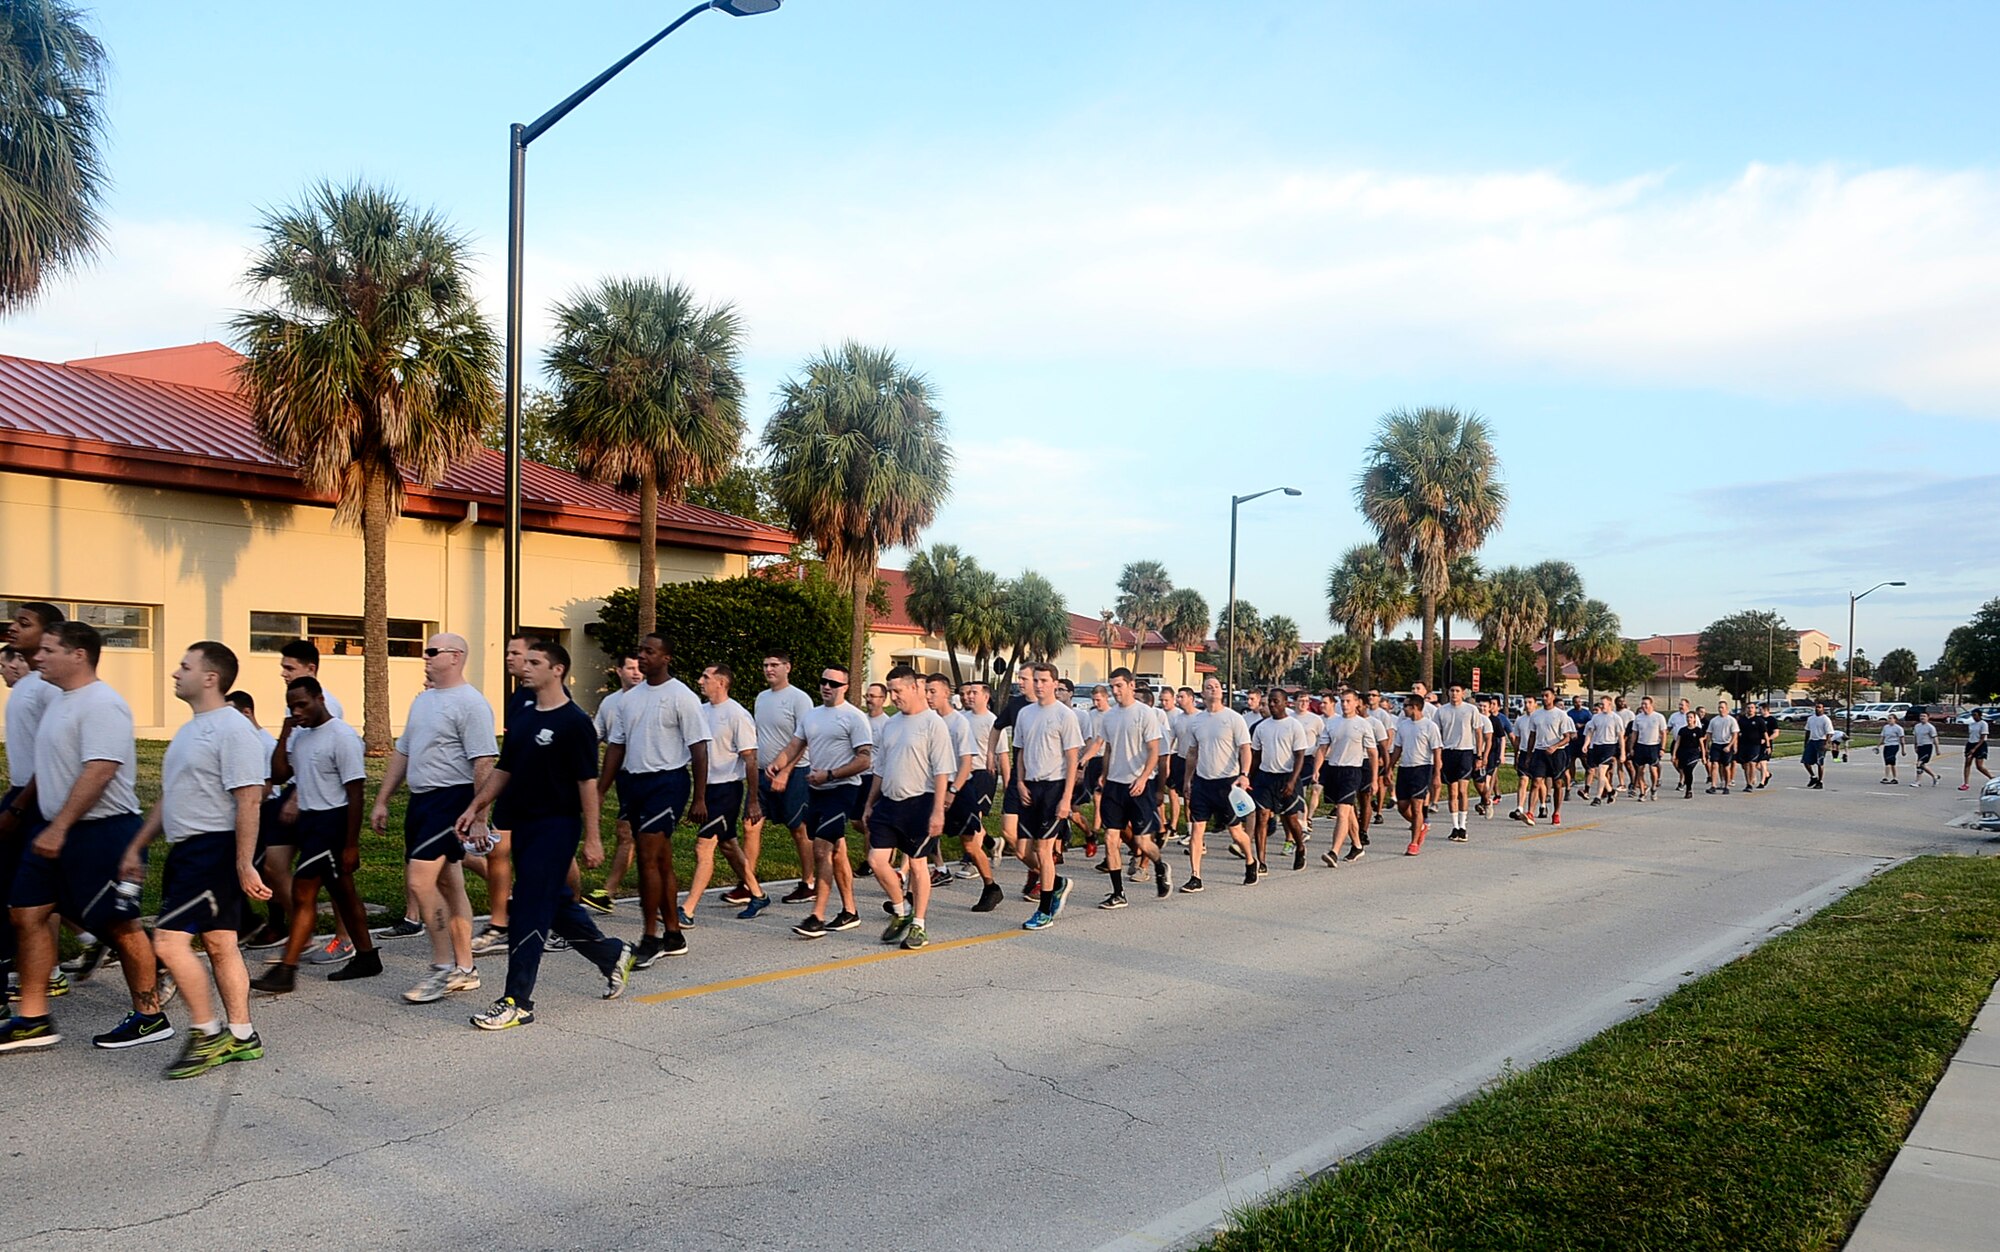 Members from the 6th Air Mobility Wing participate in Wingman Day at MacDill Air Force Base, Fla., Sept. 26, 2016. Wingman Day focused on the four pillars of Comprehensive Airman Fitness, which includes physical, mental, spiritual, and social pillars of health. (U.S. Air Force photo by Senior Airman Tori Schultz)